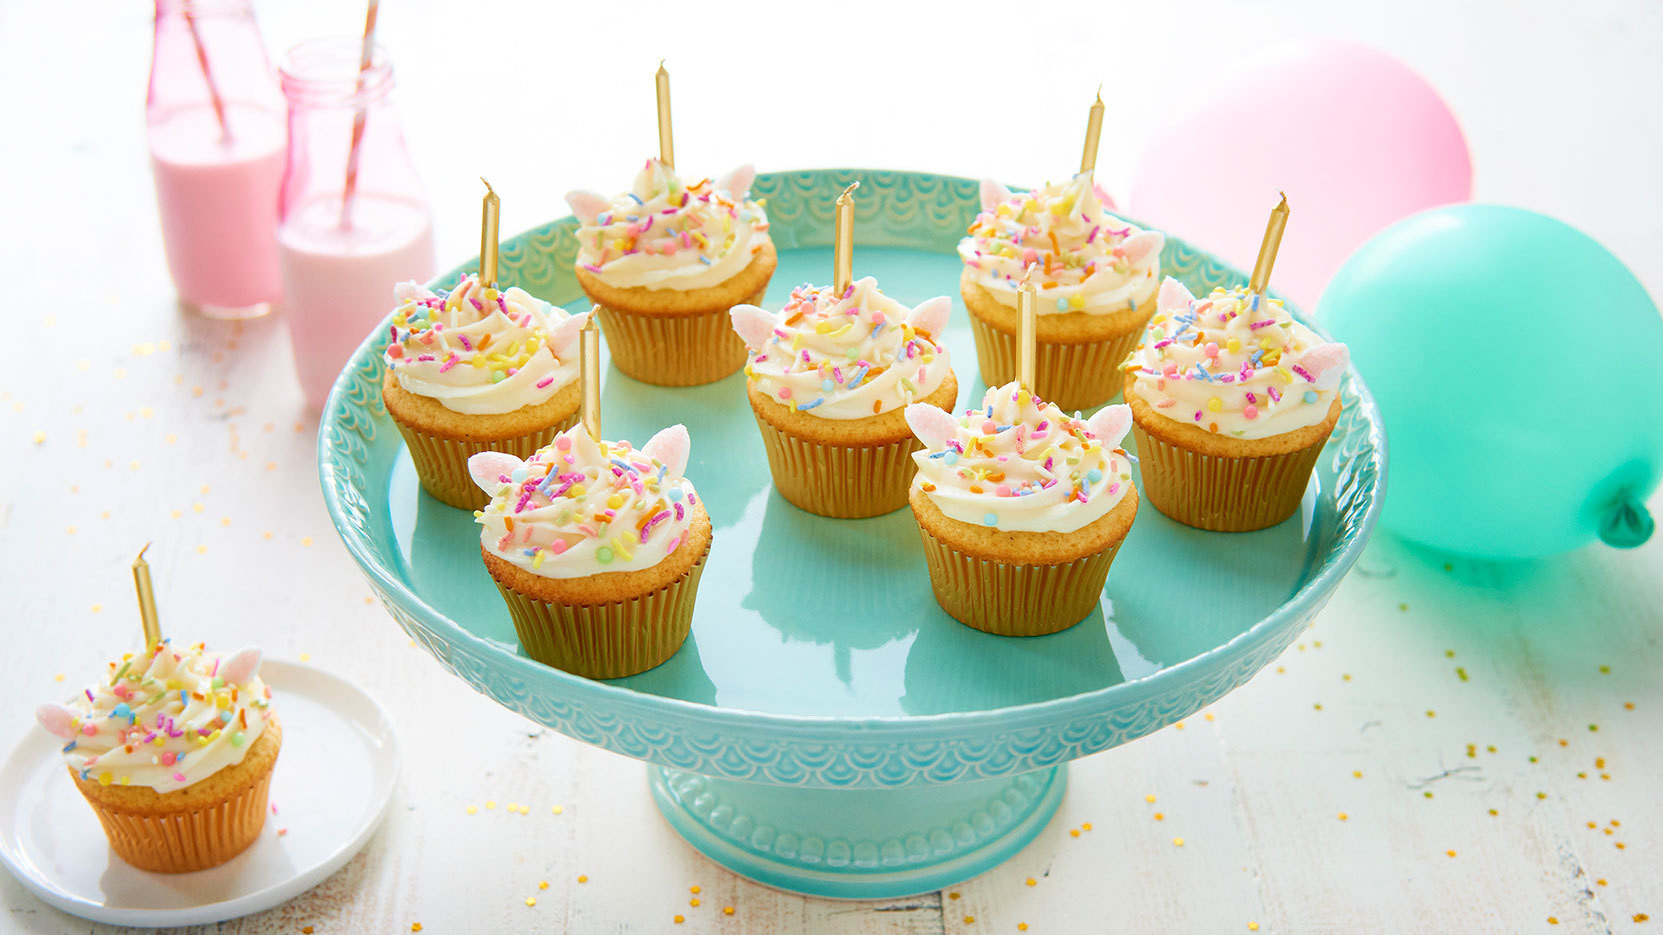 Ideas For A Unicorn Child'S Birthday Party
 Magical Unicorn Birthday Party Ideas for Kids EatingWell